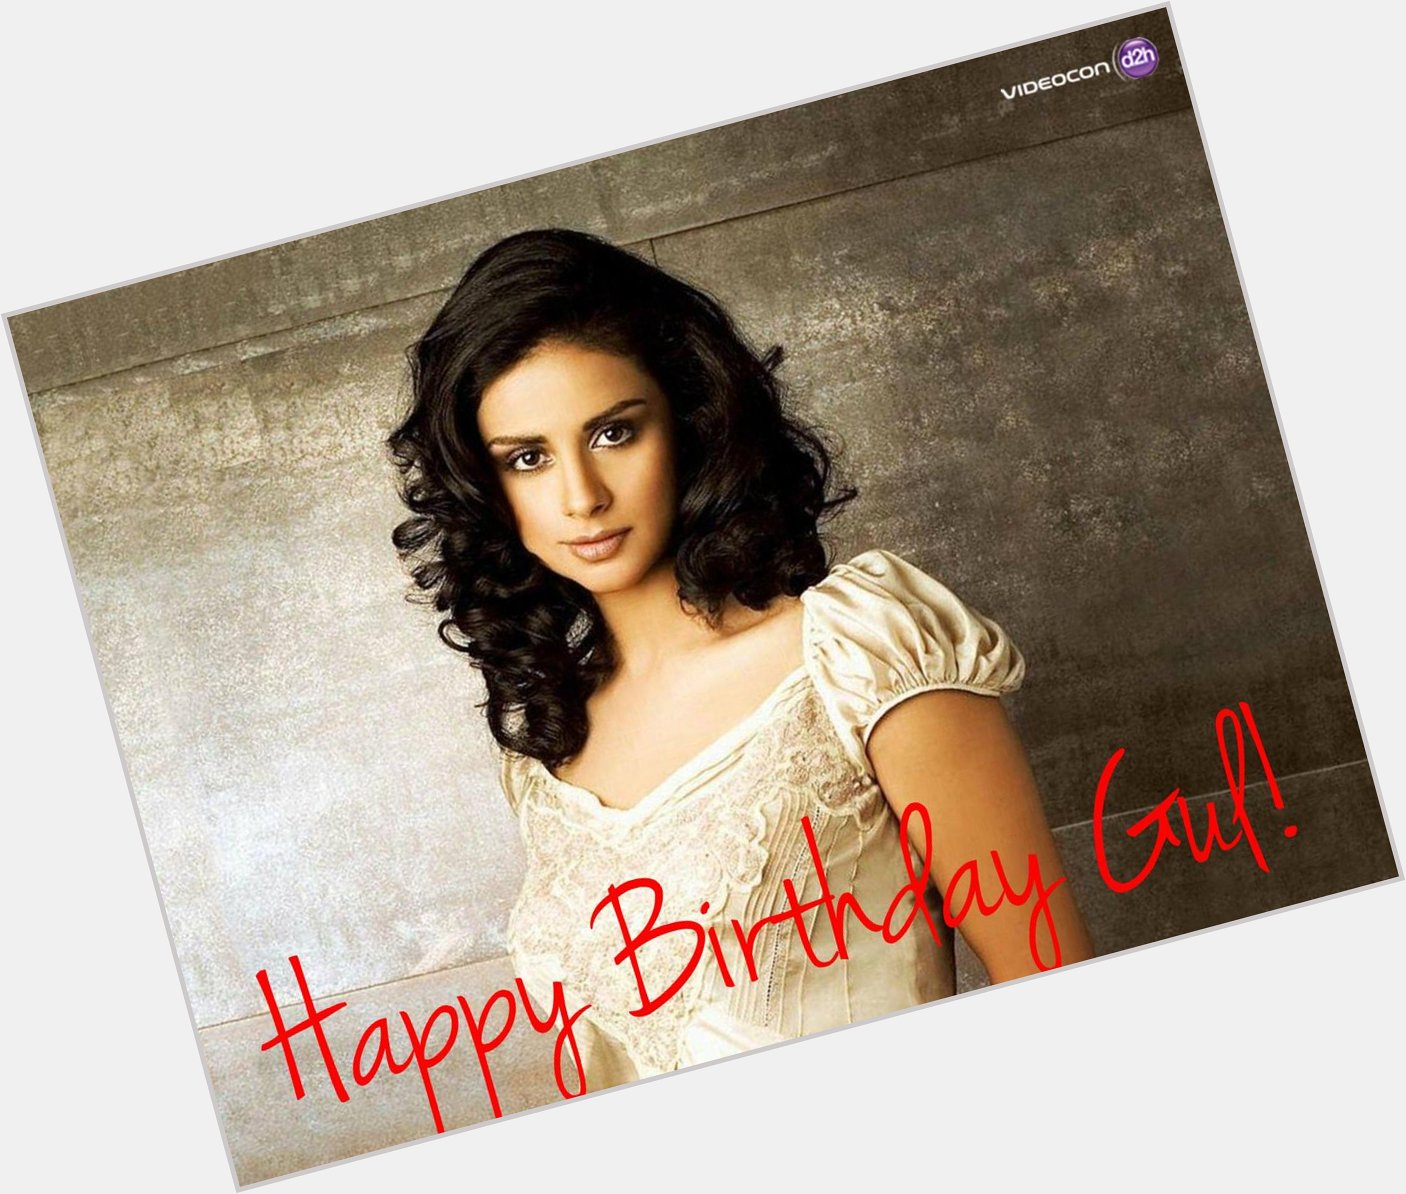 Happy Birthday Gul Panag!
Join us in wishing the Woman with Many Facets a wonderful year ahead. 